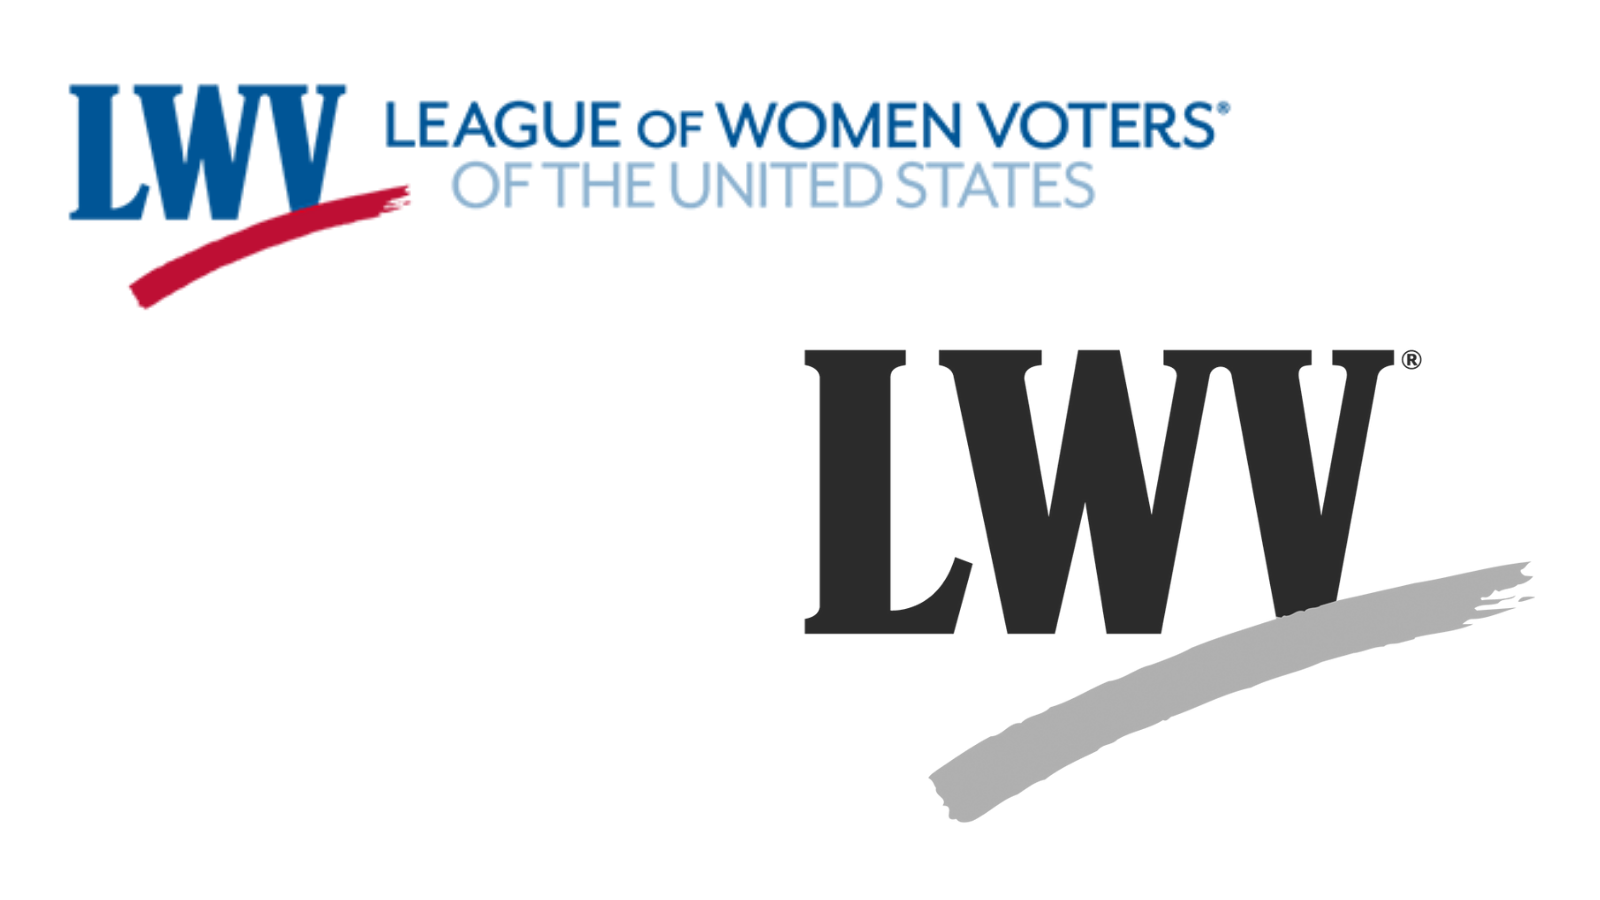 General LWV logo files. Top left is the LWV red and blue logo with "League of Women Voters of the United States" in text. Bottom right is the black and white LWV logo.